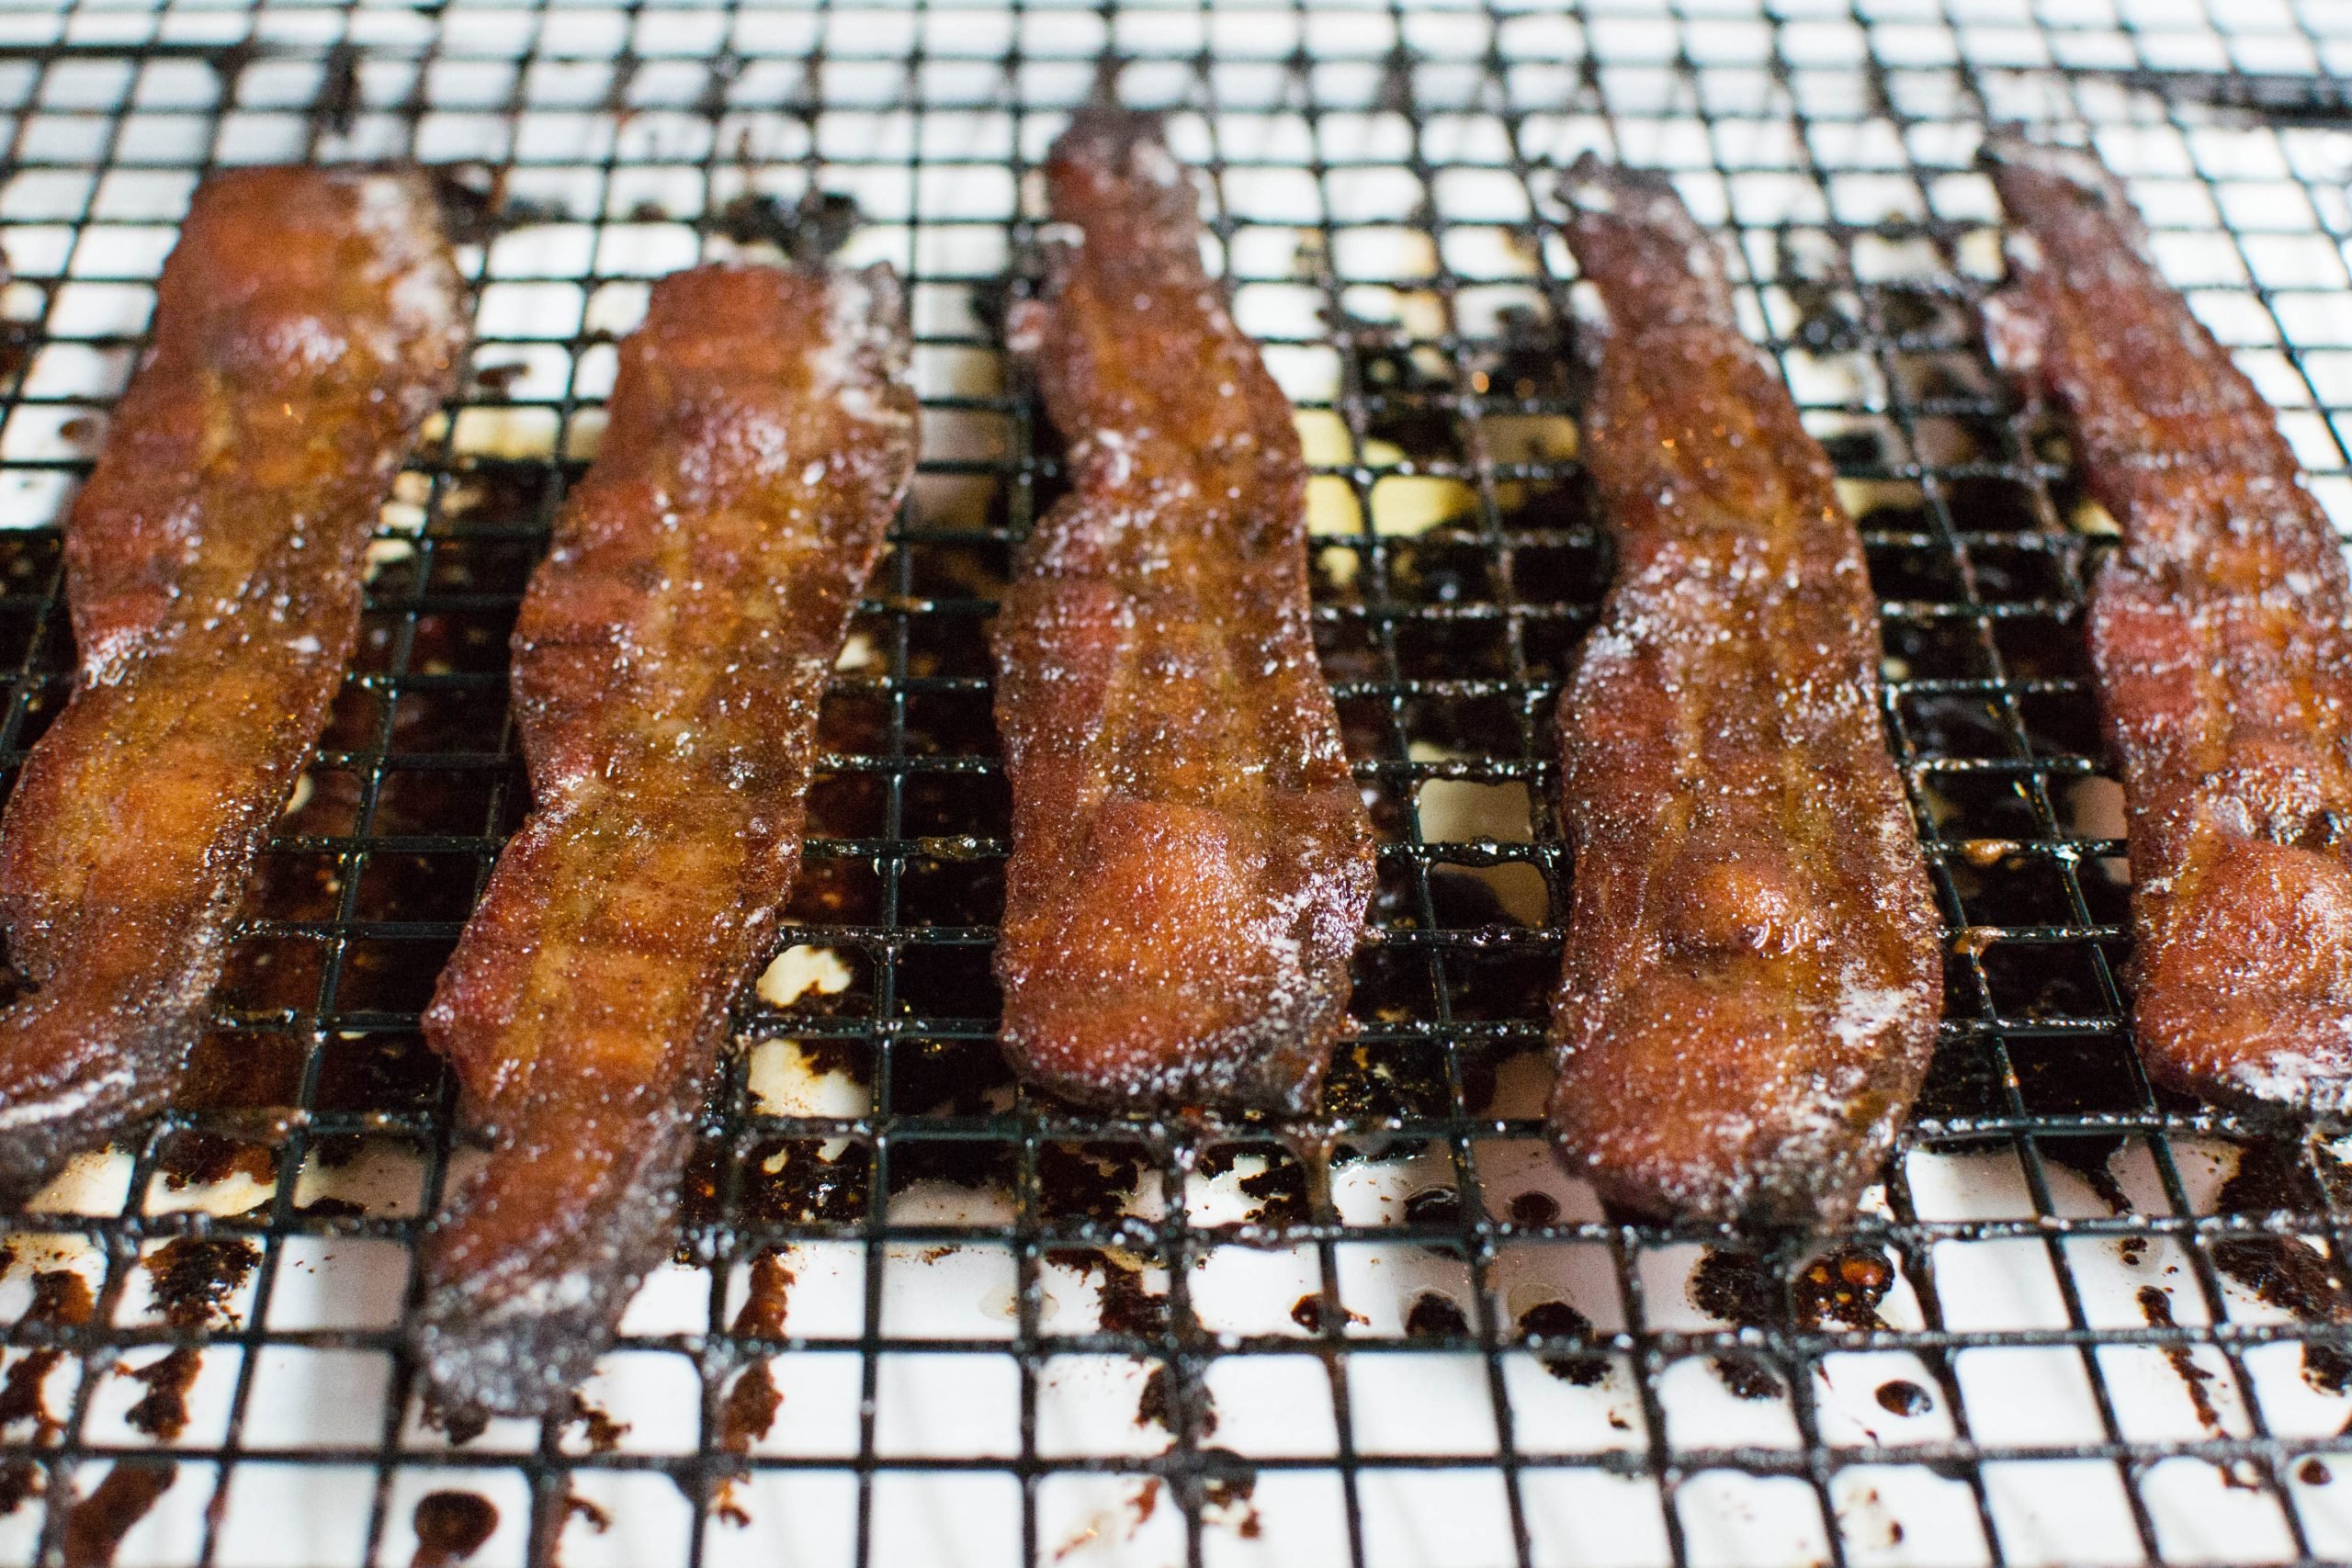 Gingerbread candied bacon, molasses, ginger, cloves, cinnamon, brown sugar, all baked in the oven to perfection. Gluten-free too!